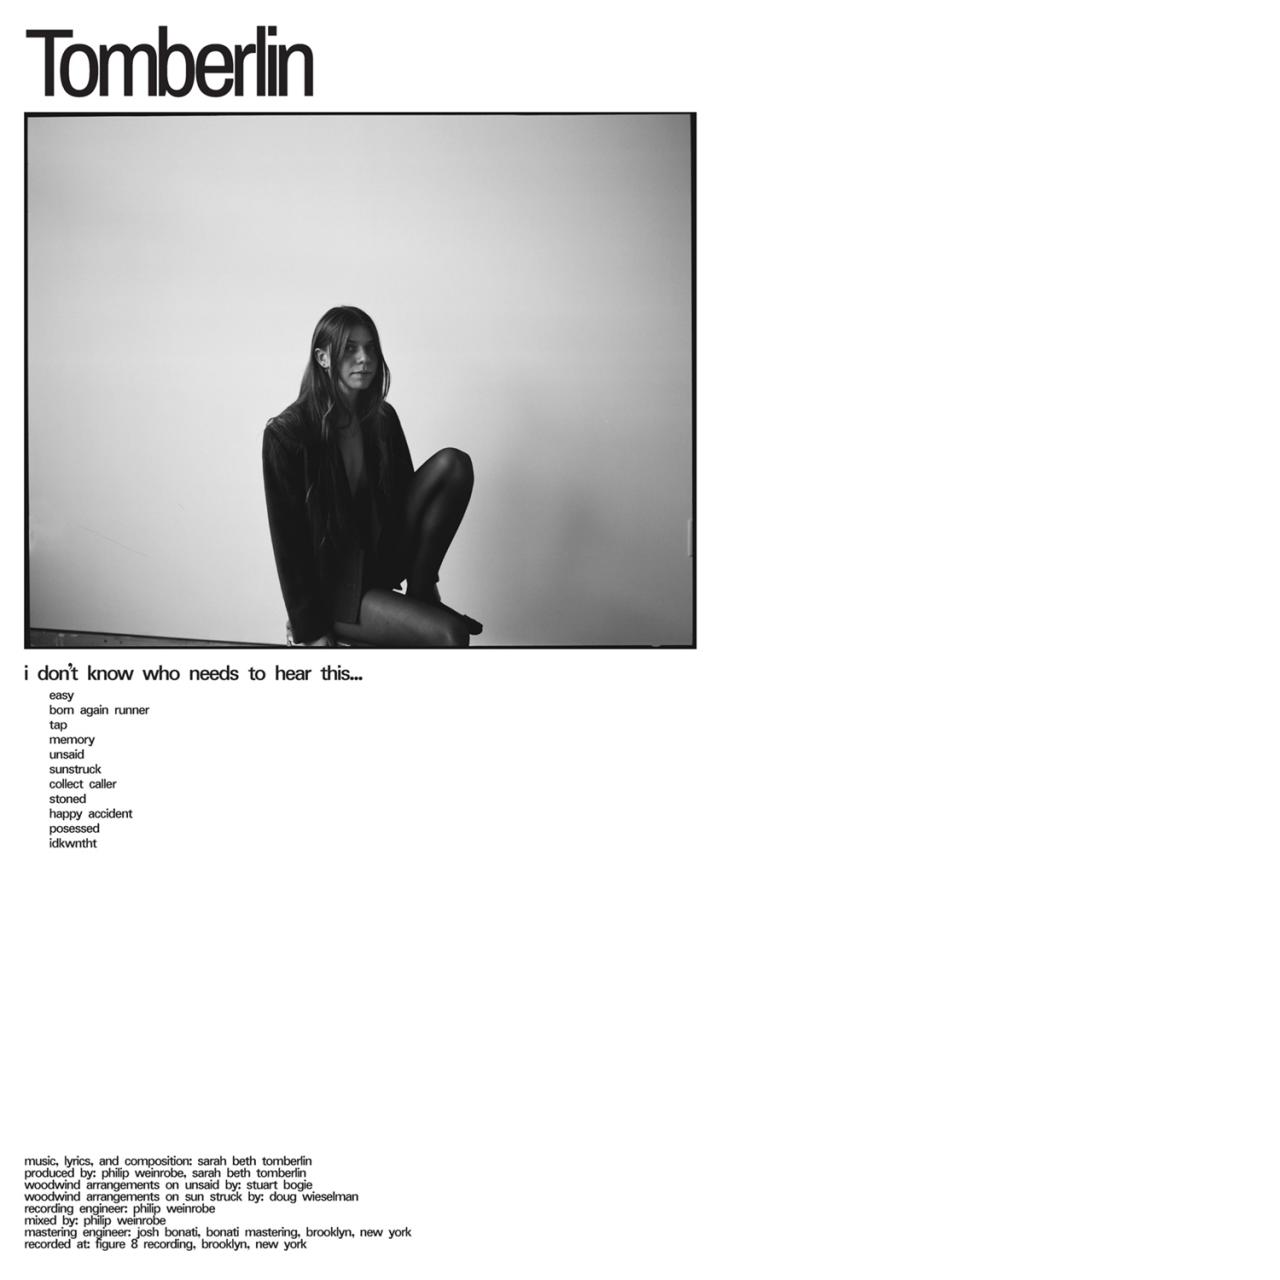 Tomberlin – “happy accident” (Feat. Cass McCombs)